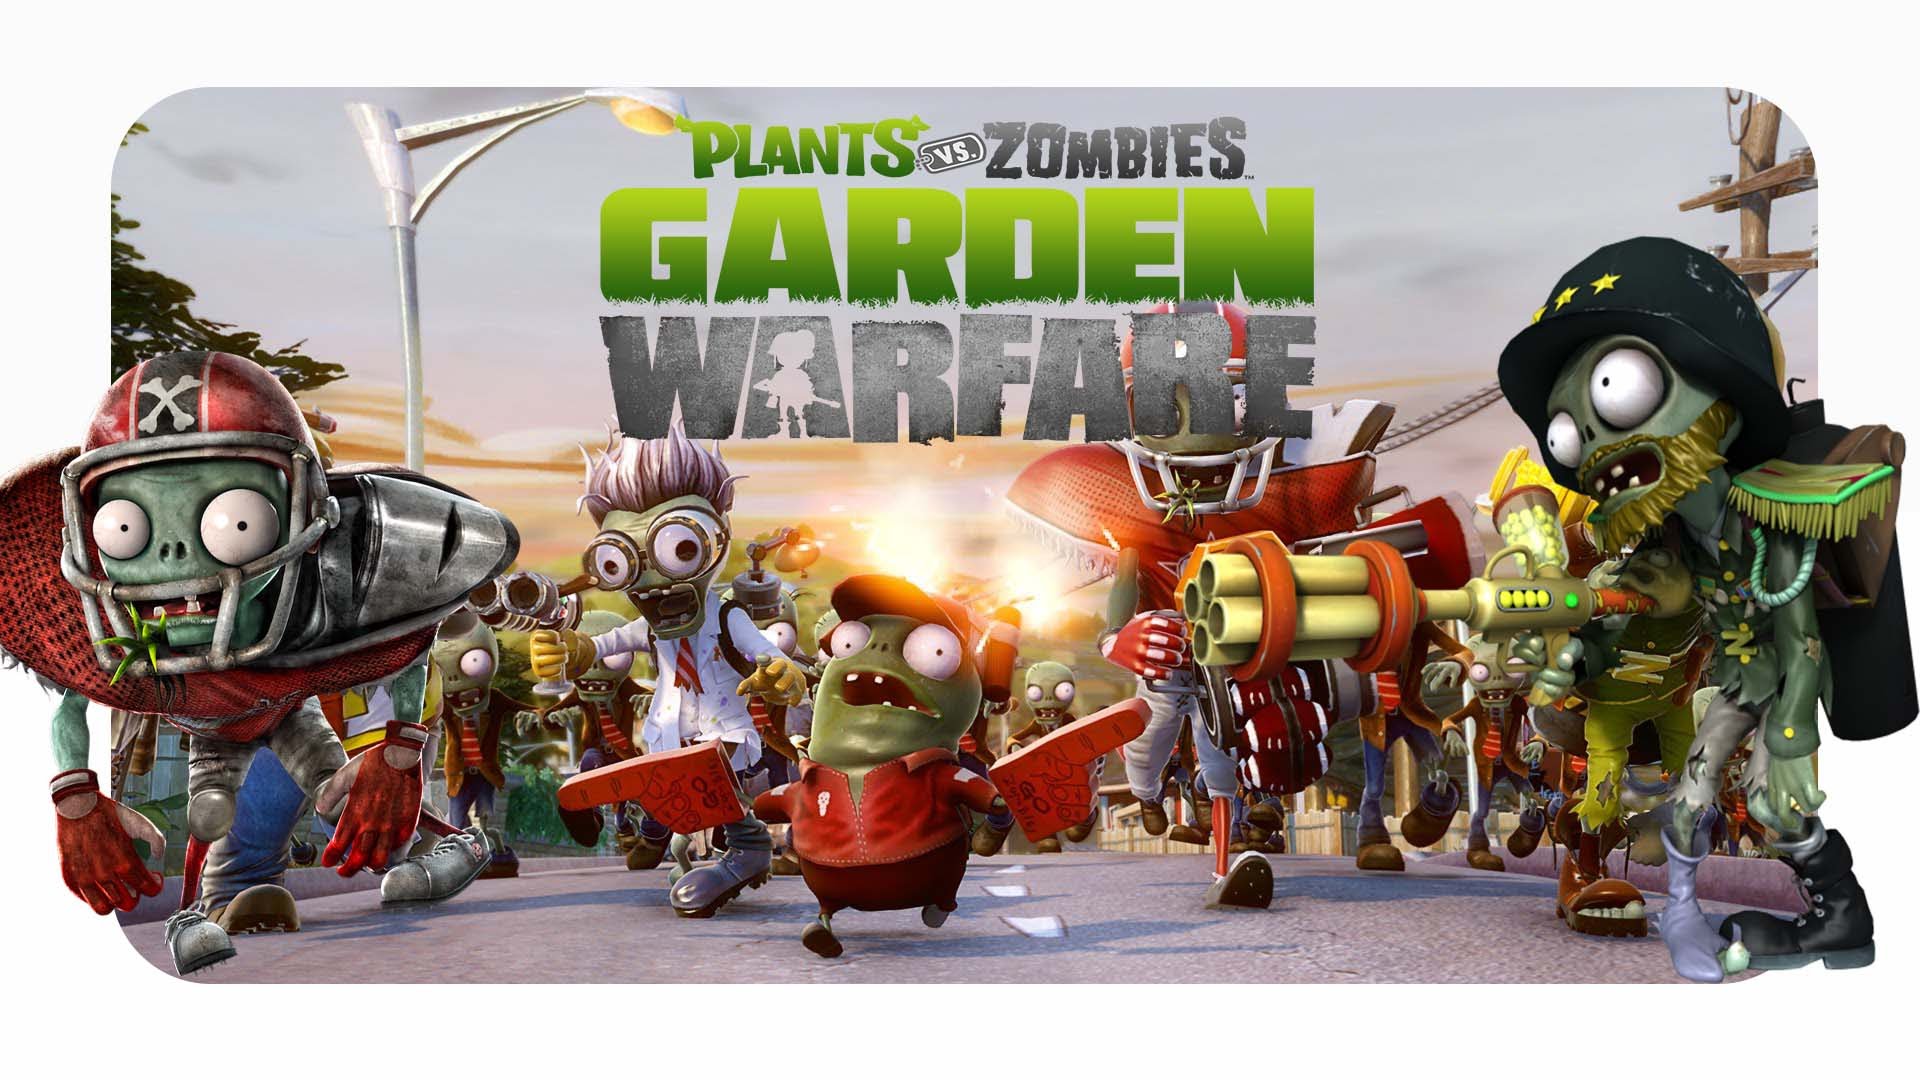 Gameplay Video For A Cancelled Plants vs Zombies Title Surface Online   eXputercom